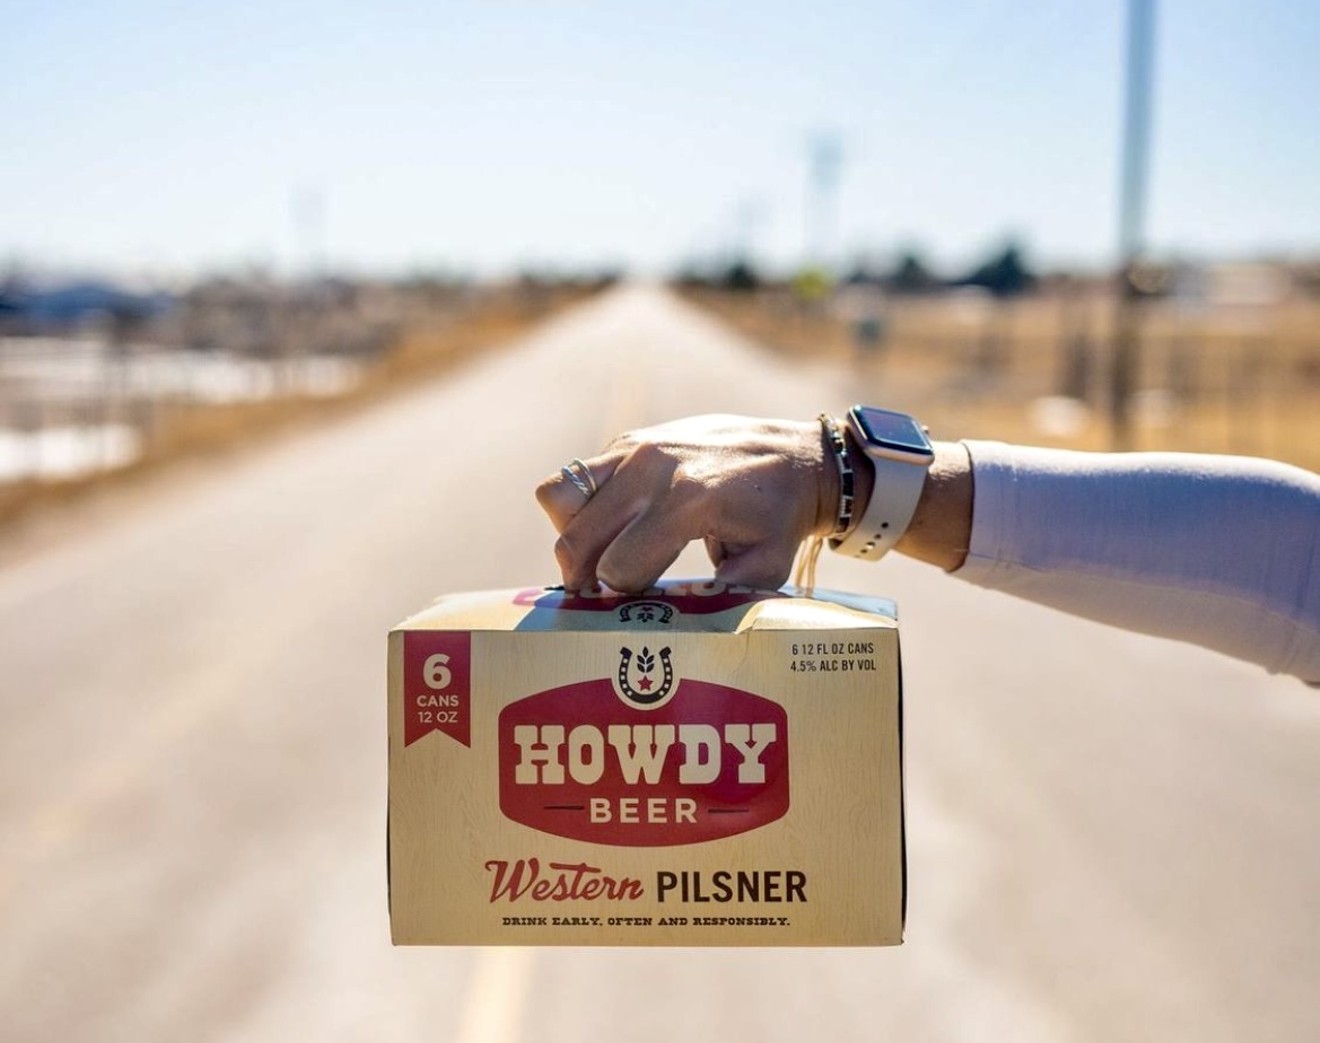 Stem Ciders says hello to Howdy Beer.